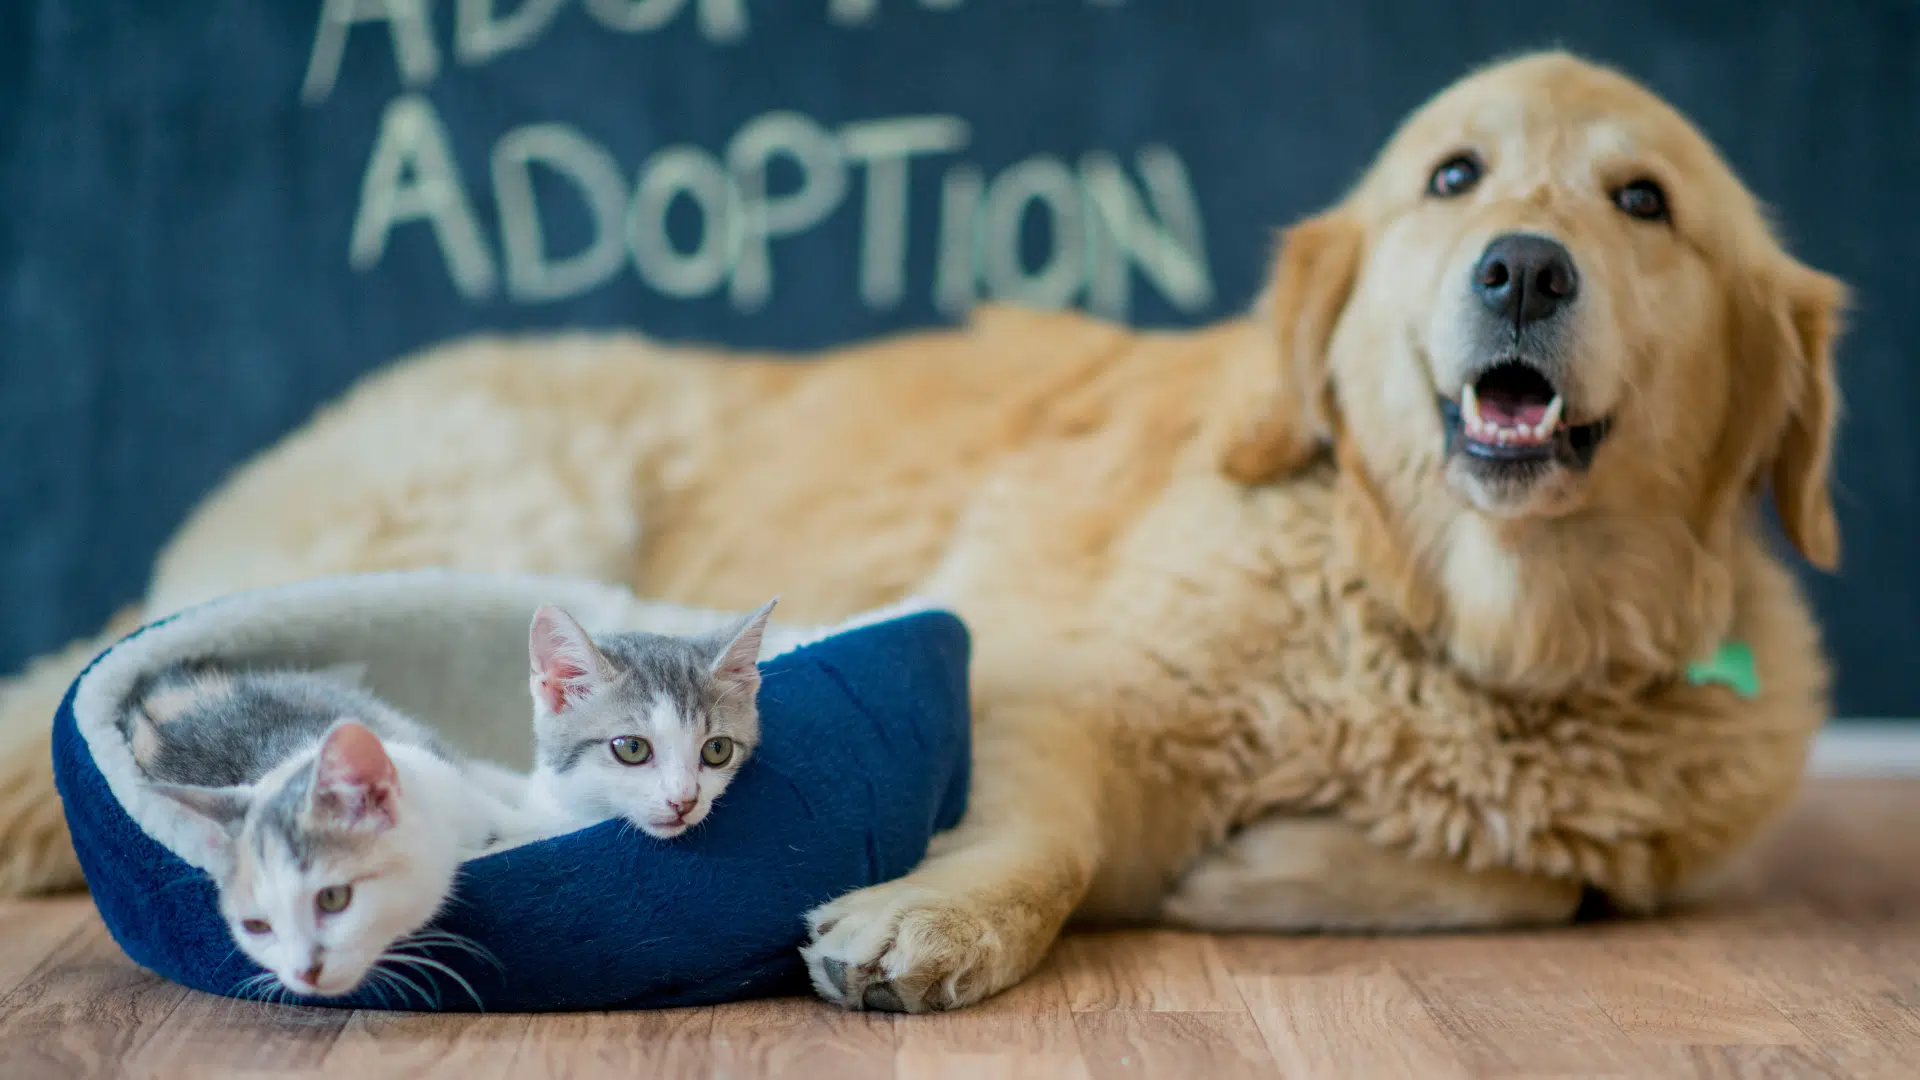 Williamson County Regional Animal Shelter Offers Free Adoptions Through  Sunday, August 14 | Hello Georgetown